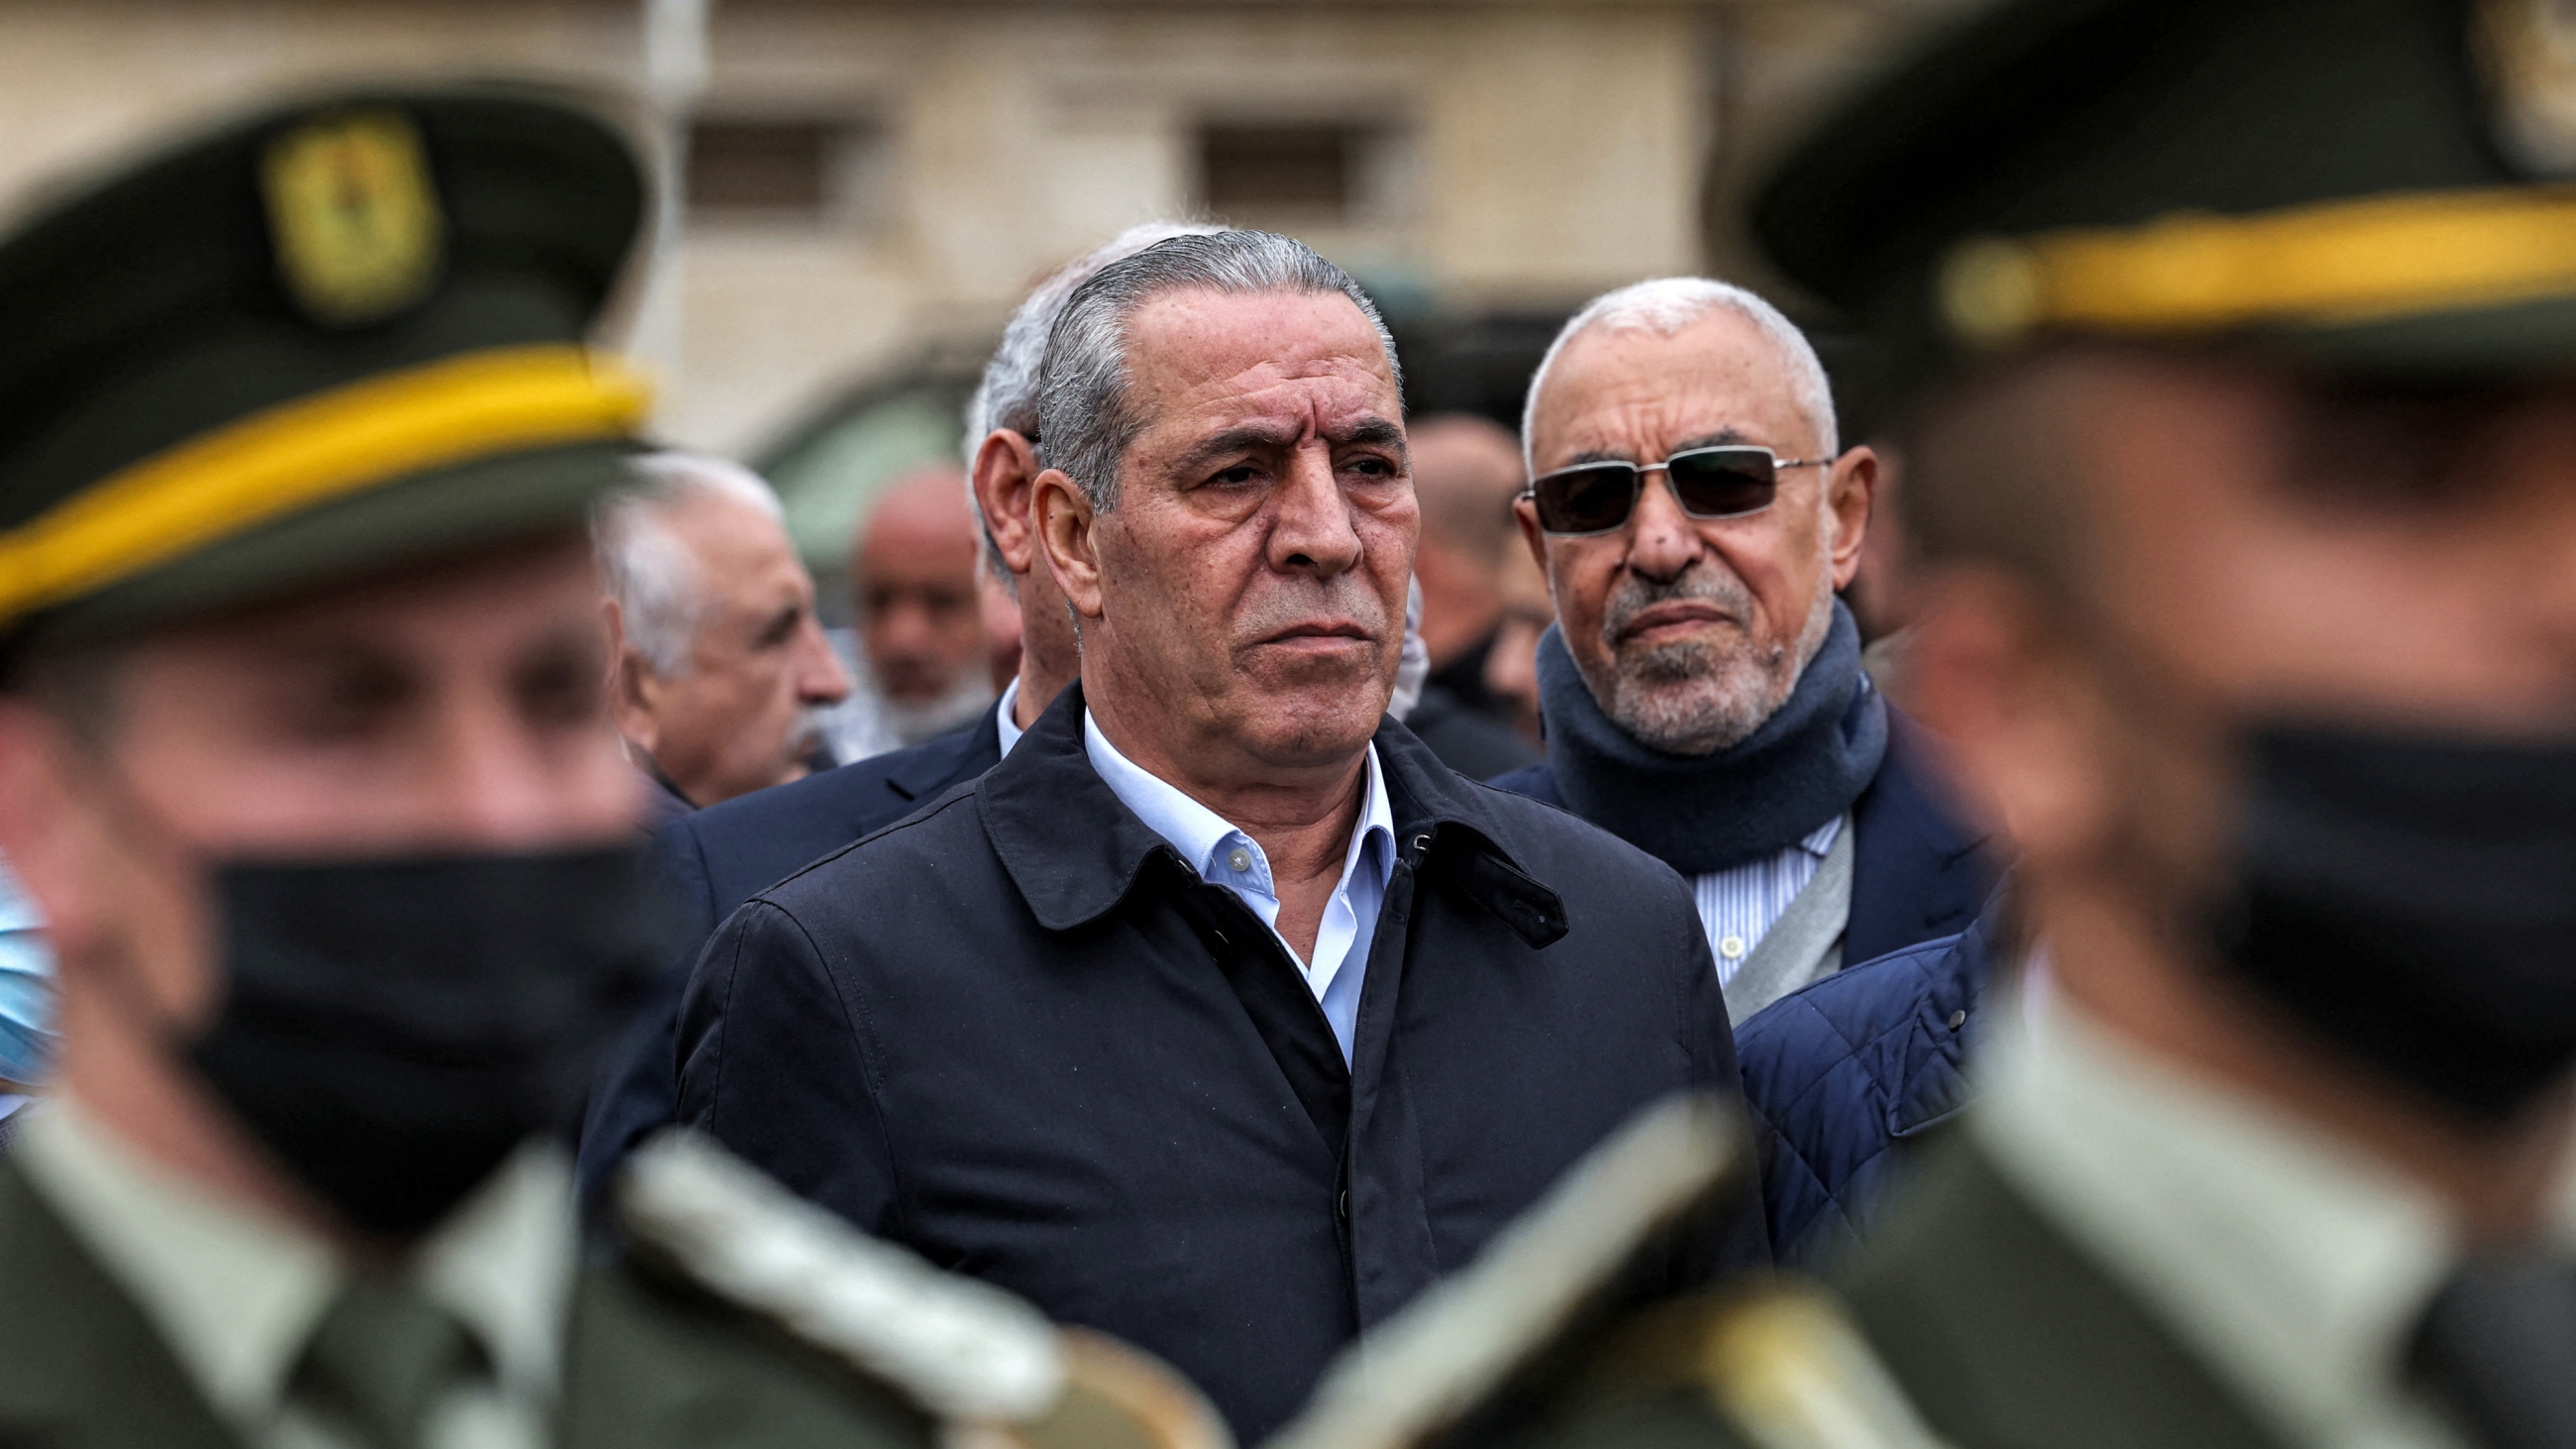 Hussein al-Sheikh attends the funeral of late Palestinian prime minister Ahmad Qorei in the occupied West Bank city of Ramallah on 22 February 2023 (AFP)